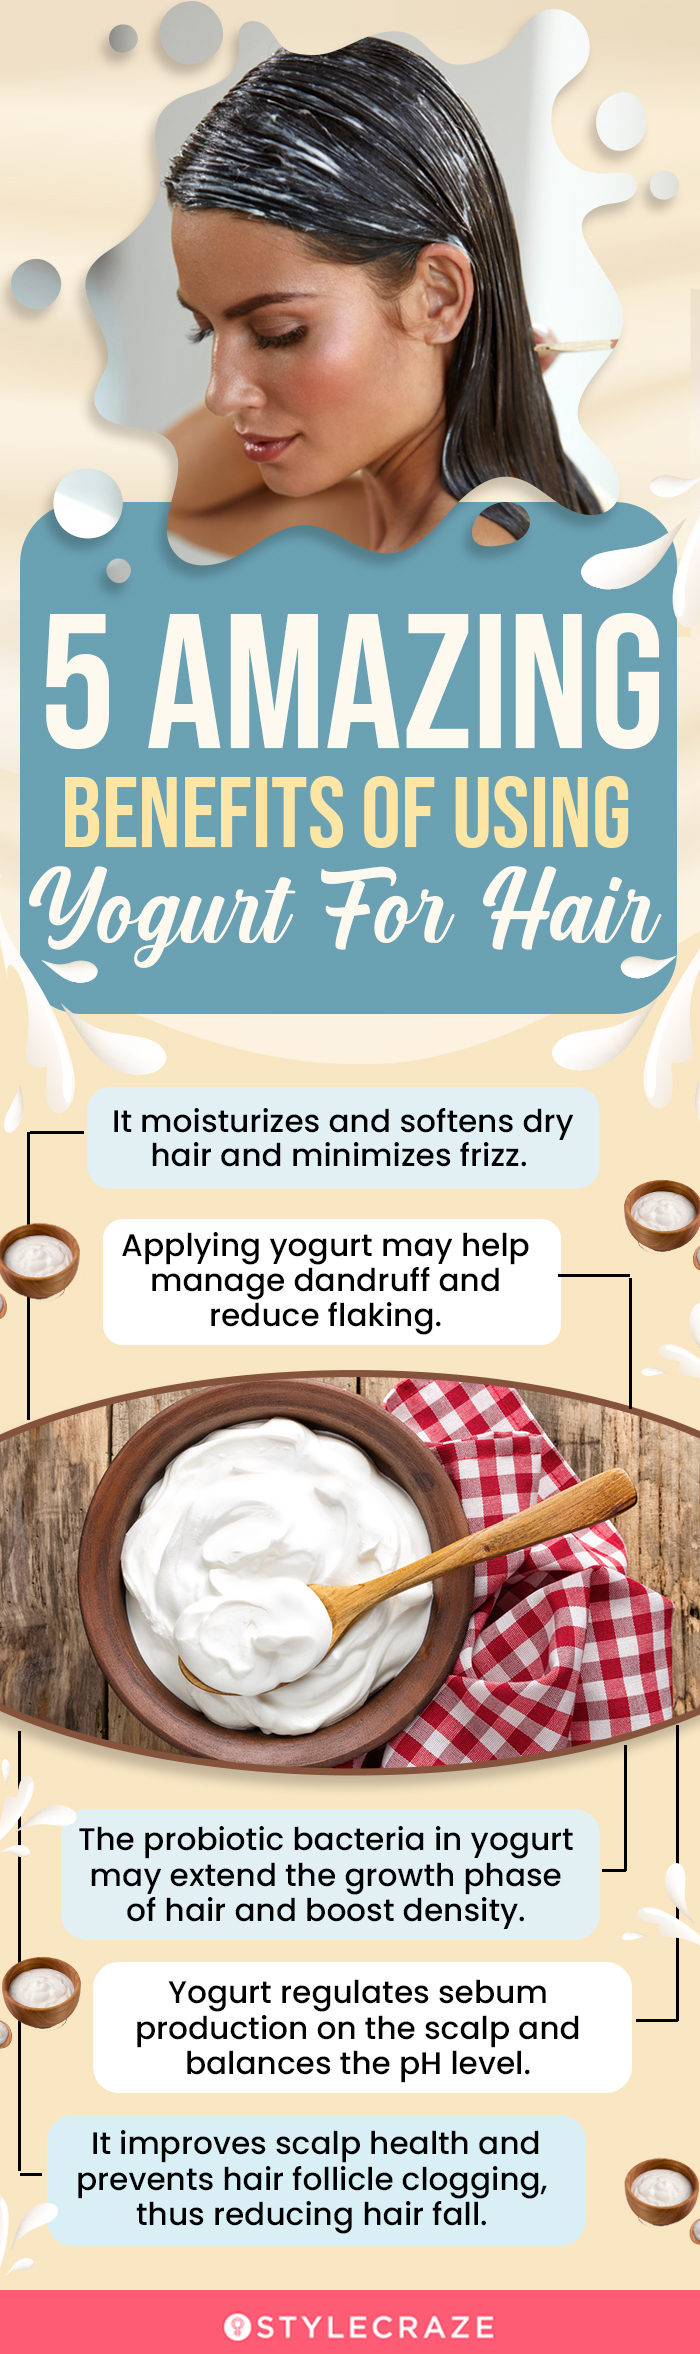 Anel's Beauty Salon - Egg & Yogurt Hair mask: Eggs can be a great source of  protein for your hair. The yolk is rich in fats and proteins which is  extremely moisturizing.